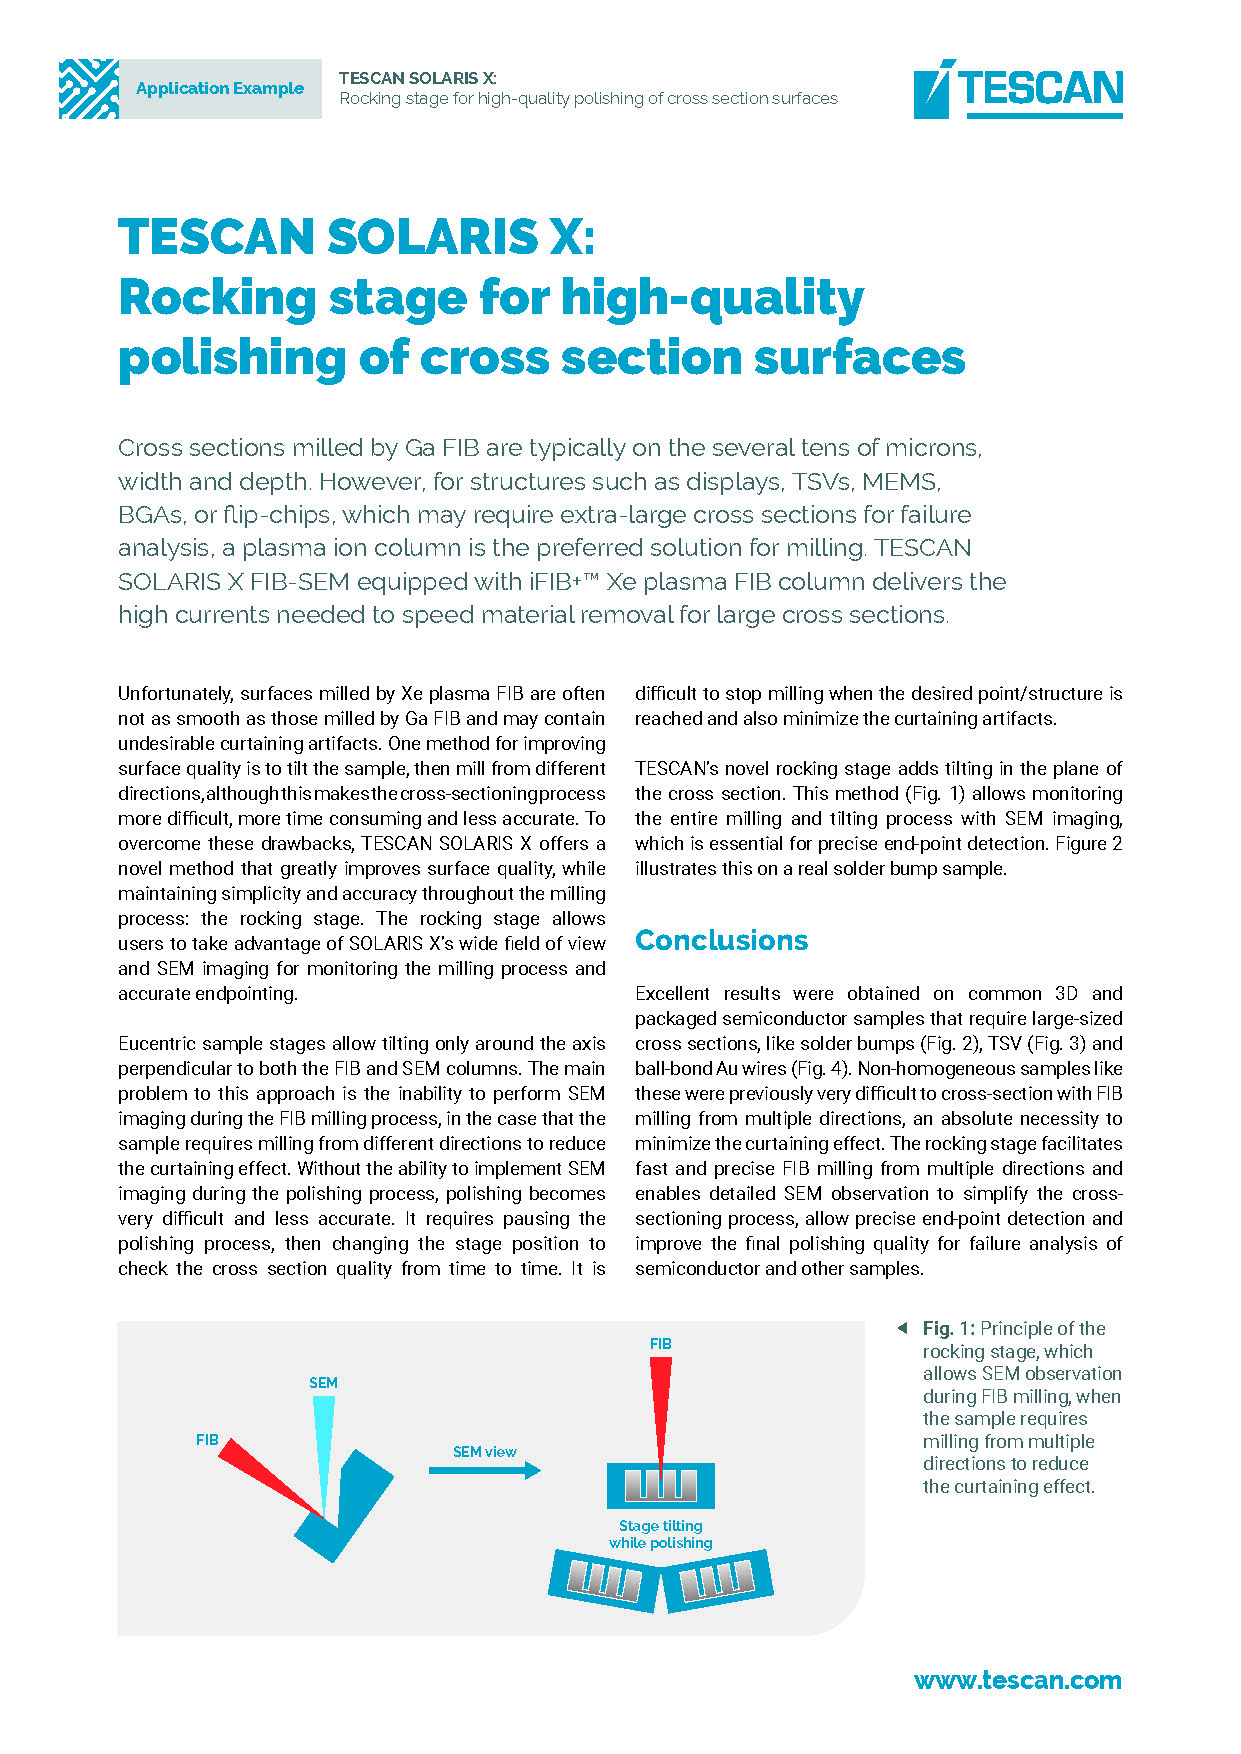 TESCAN-SOLARIS-X-Rocking-stage-for-igh quality-polishing-of-cross-section-surface_App-note_Page_1